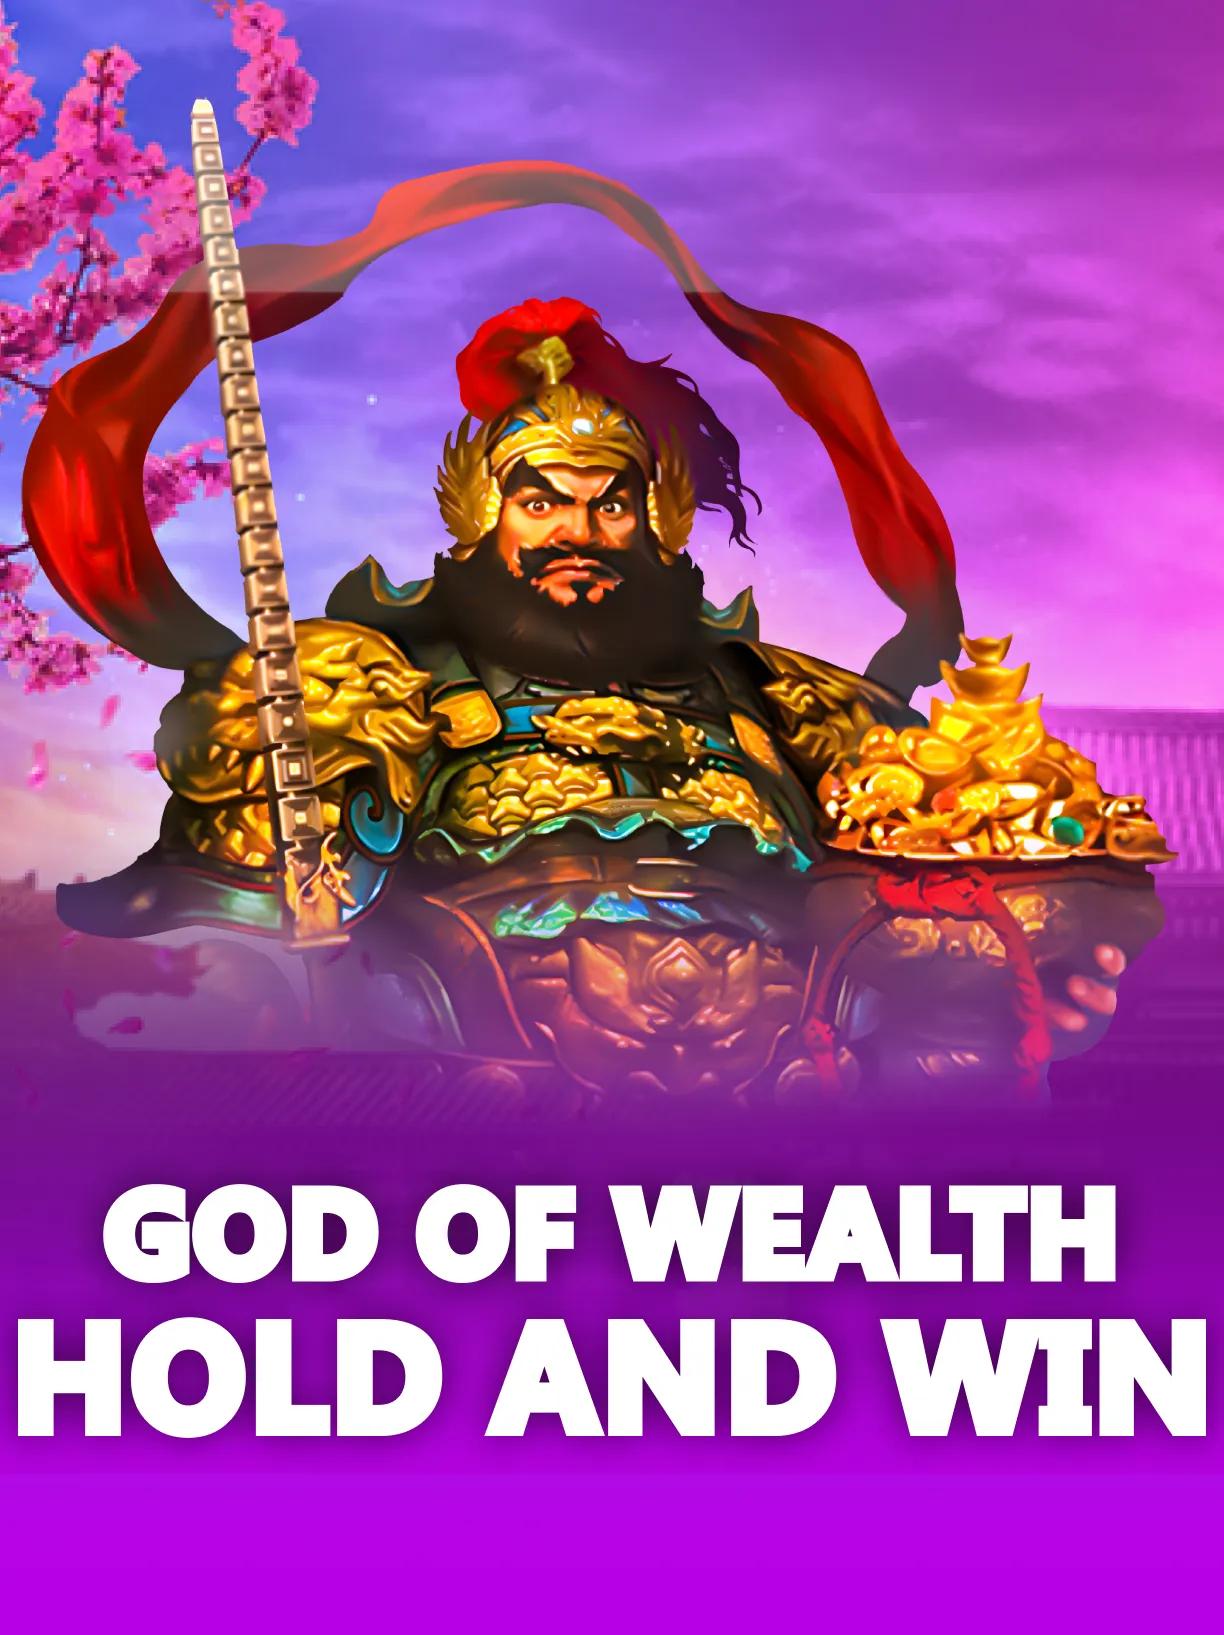 God_of_Wealth_Hold_And_Win_square.webp